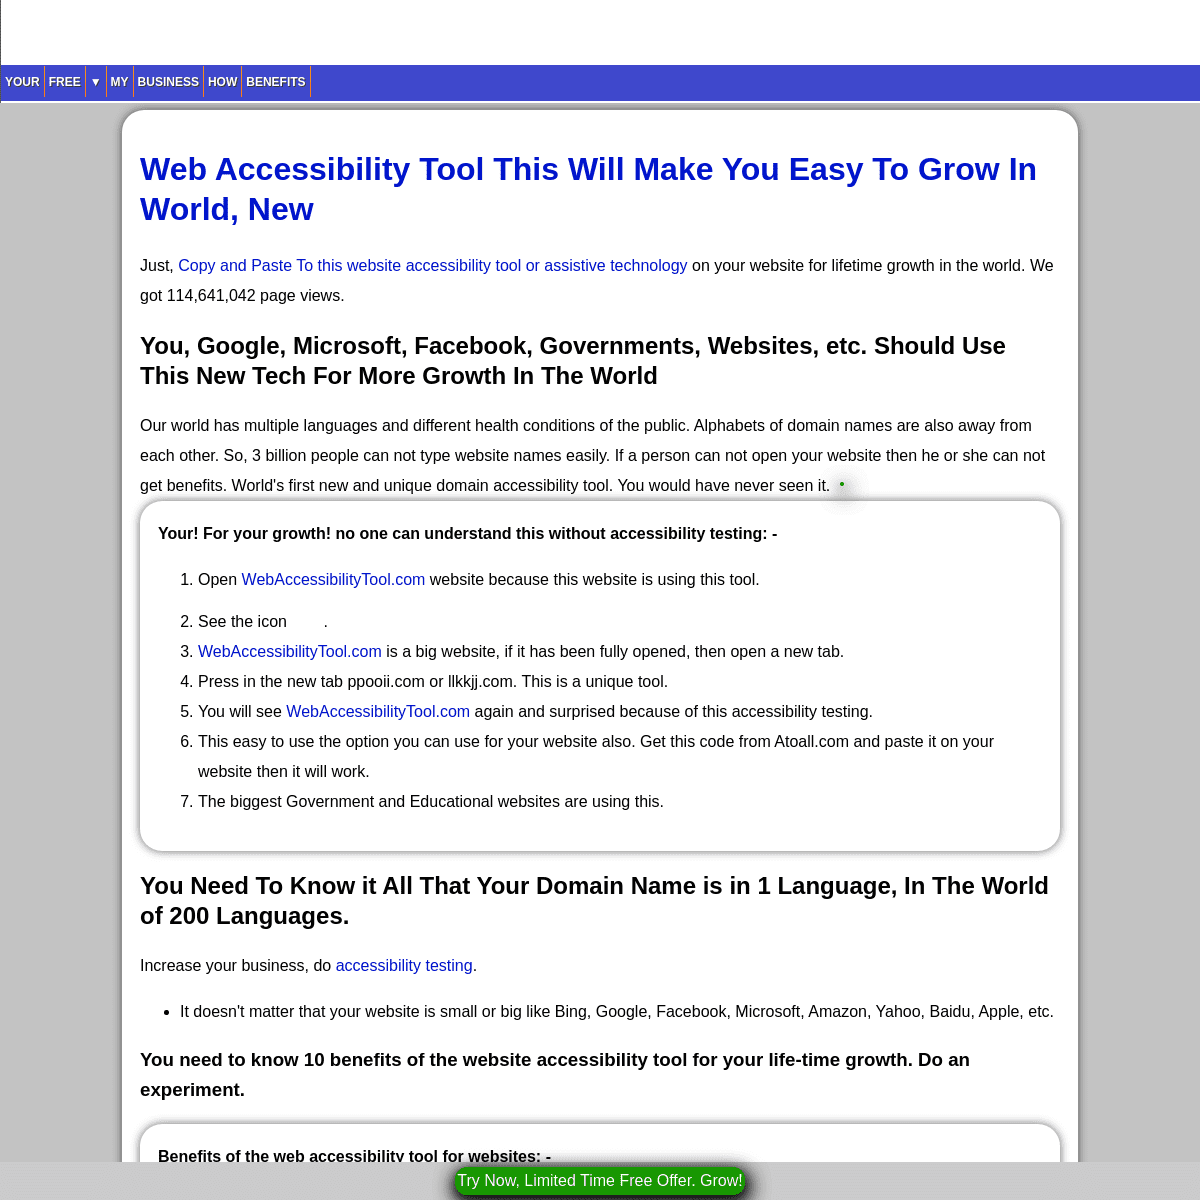 A complete backup of https://atoall.com